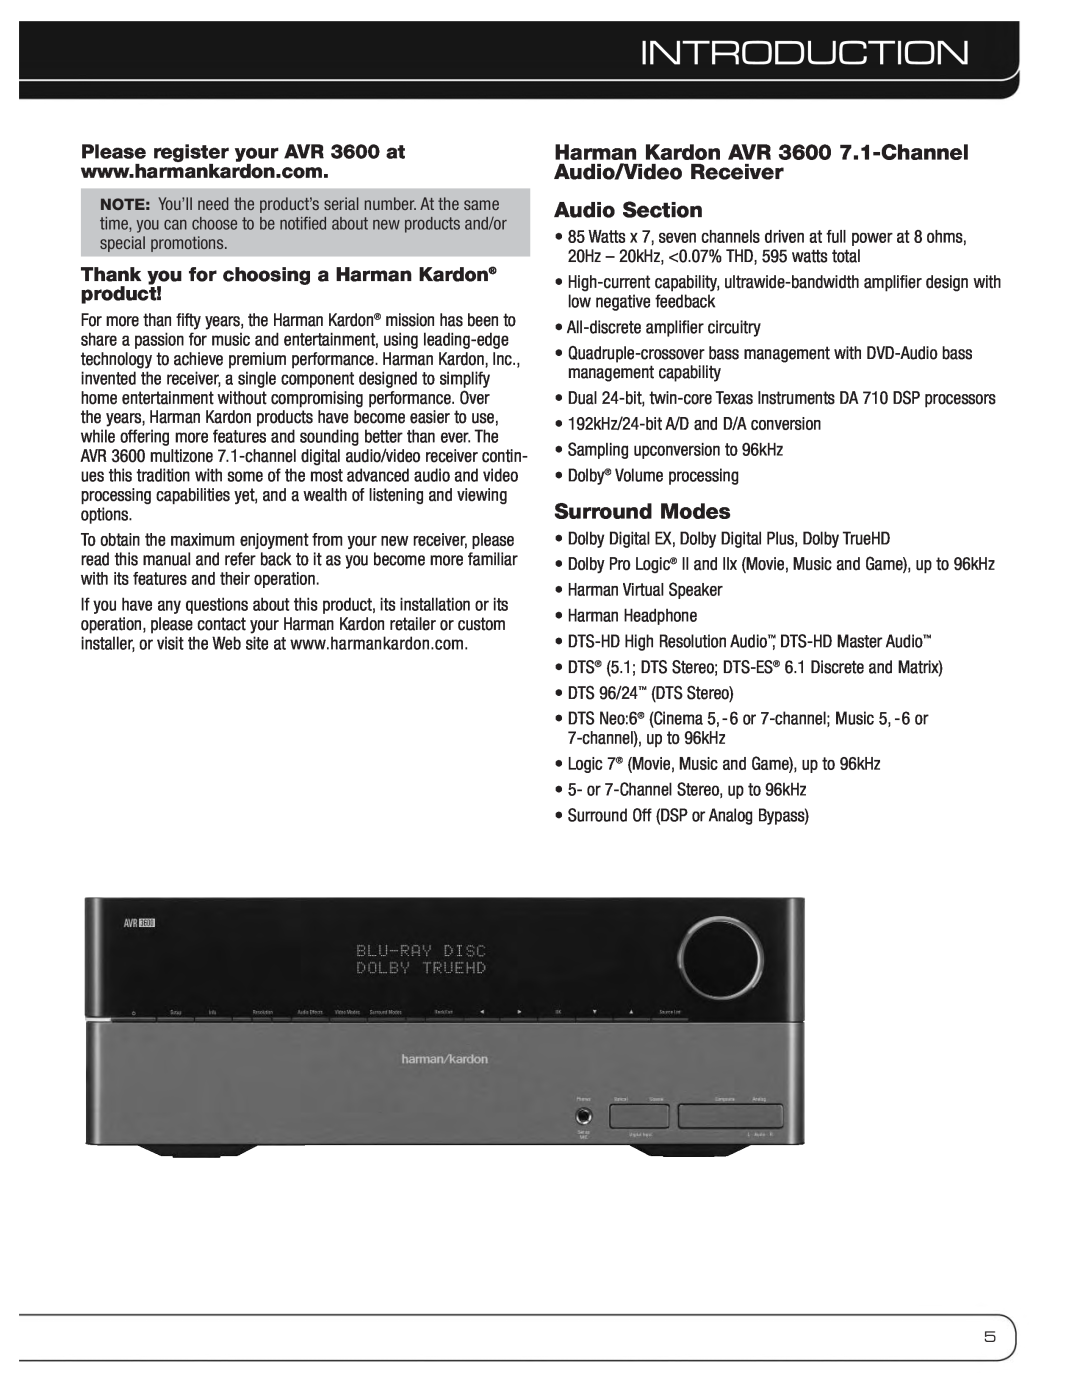 Harman-Kardon owner manual Introduction, Audio Section, Surround Modes, Please register your AVR 3600 at 